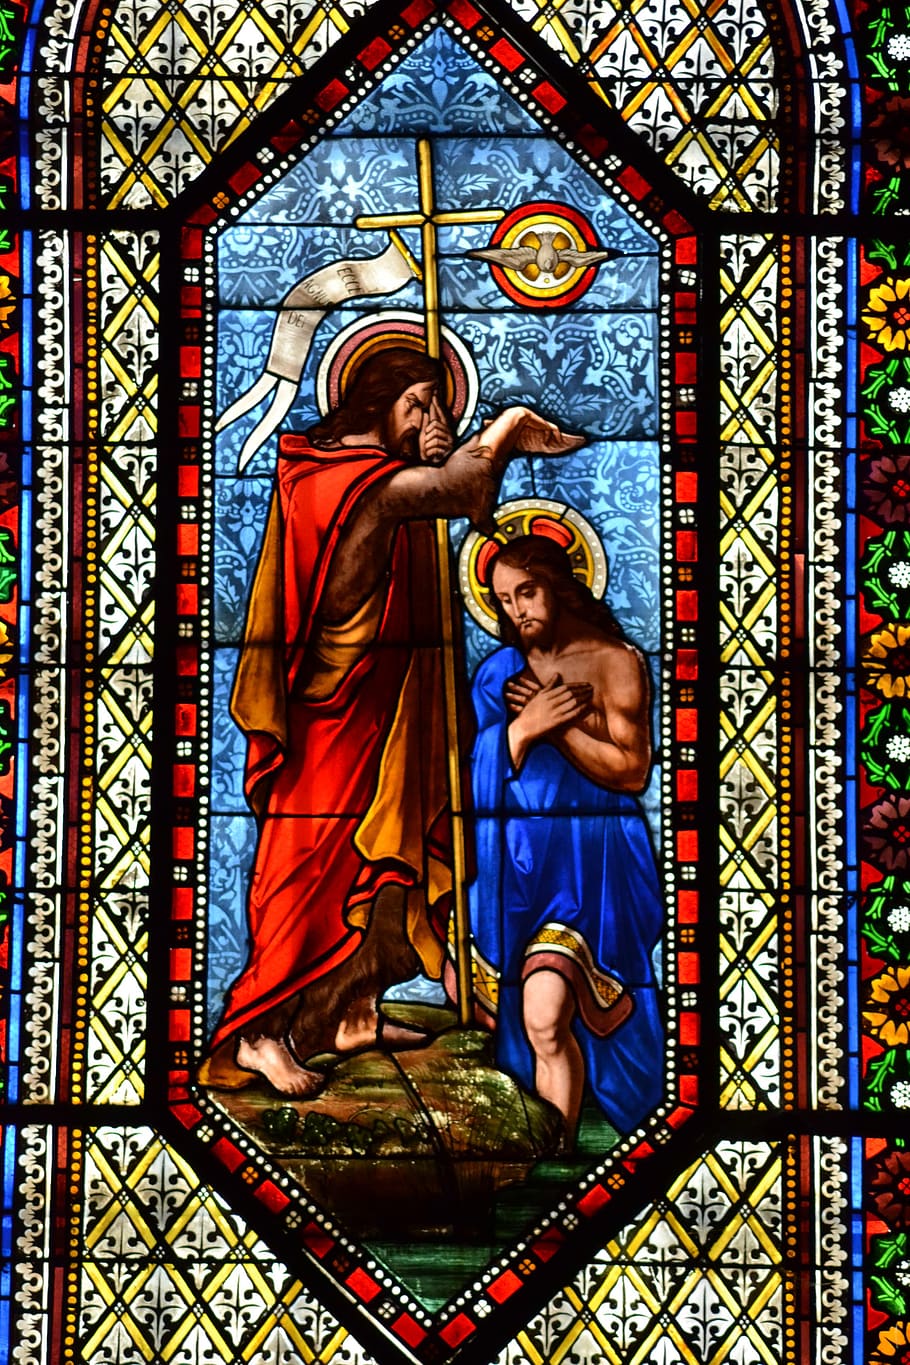 stained glass, colorful, baptism, adult, religion, faith, light, church, john the baptist, jesus